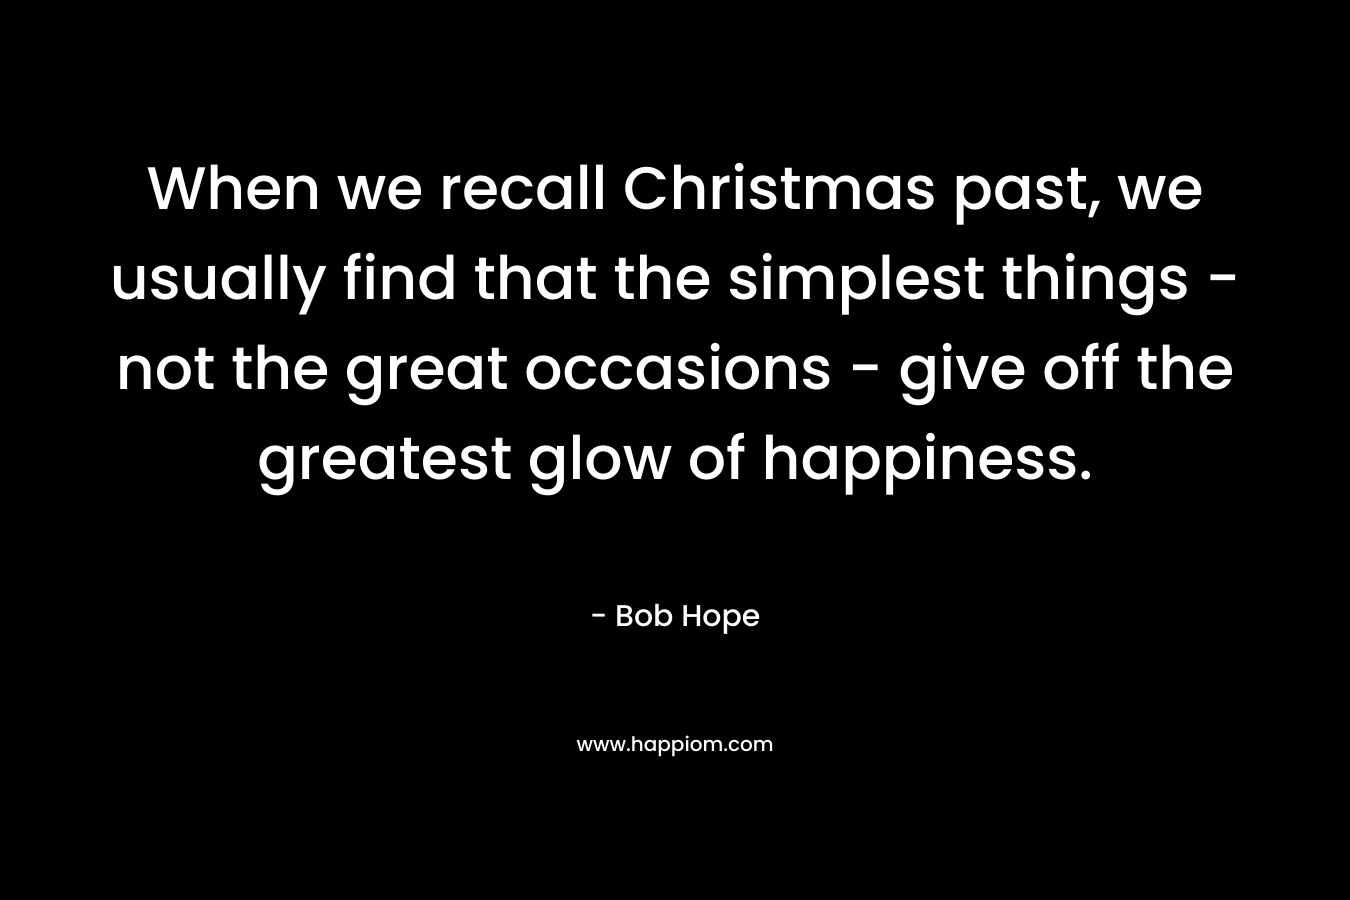 When we recall Christmas past, we usually find that the simplest things – not the great occasions – give off the greatest glow of happiness. – Bob Hope